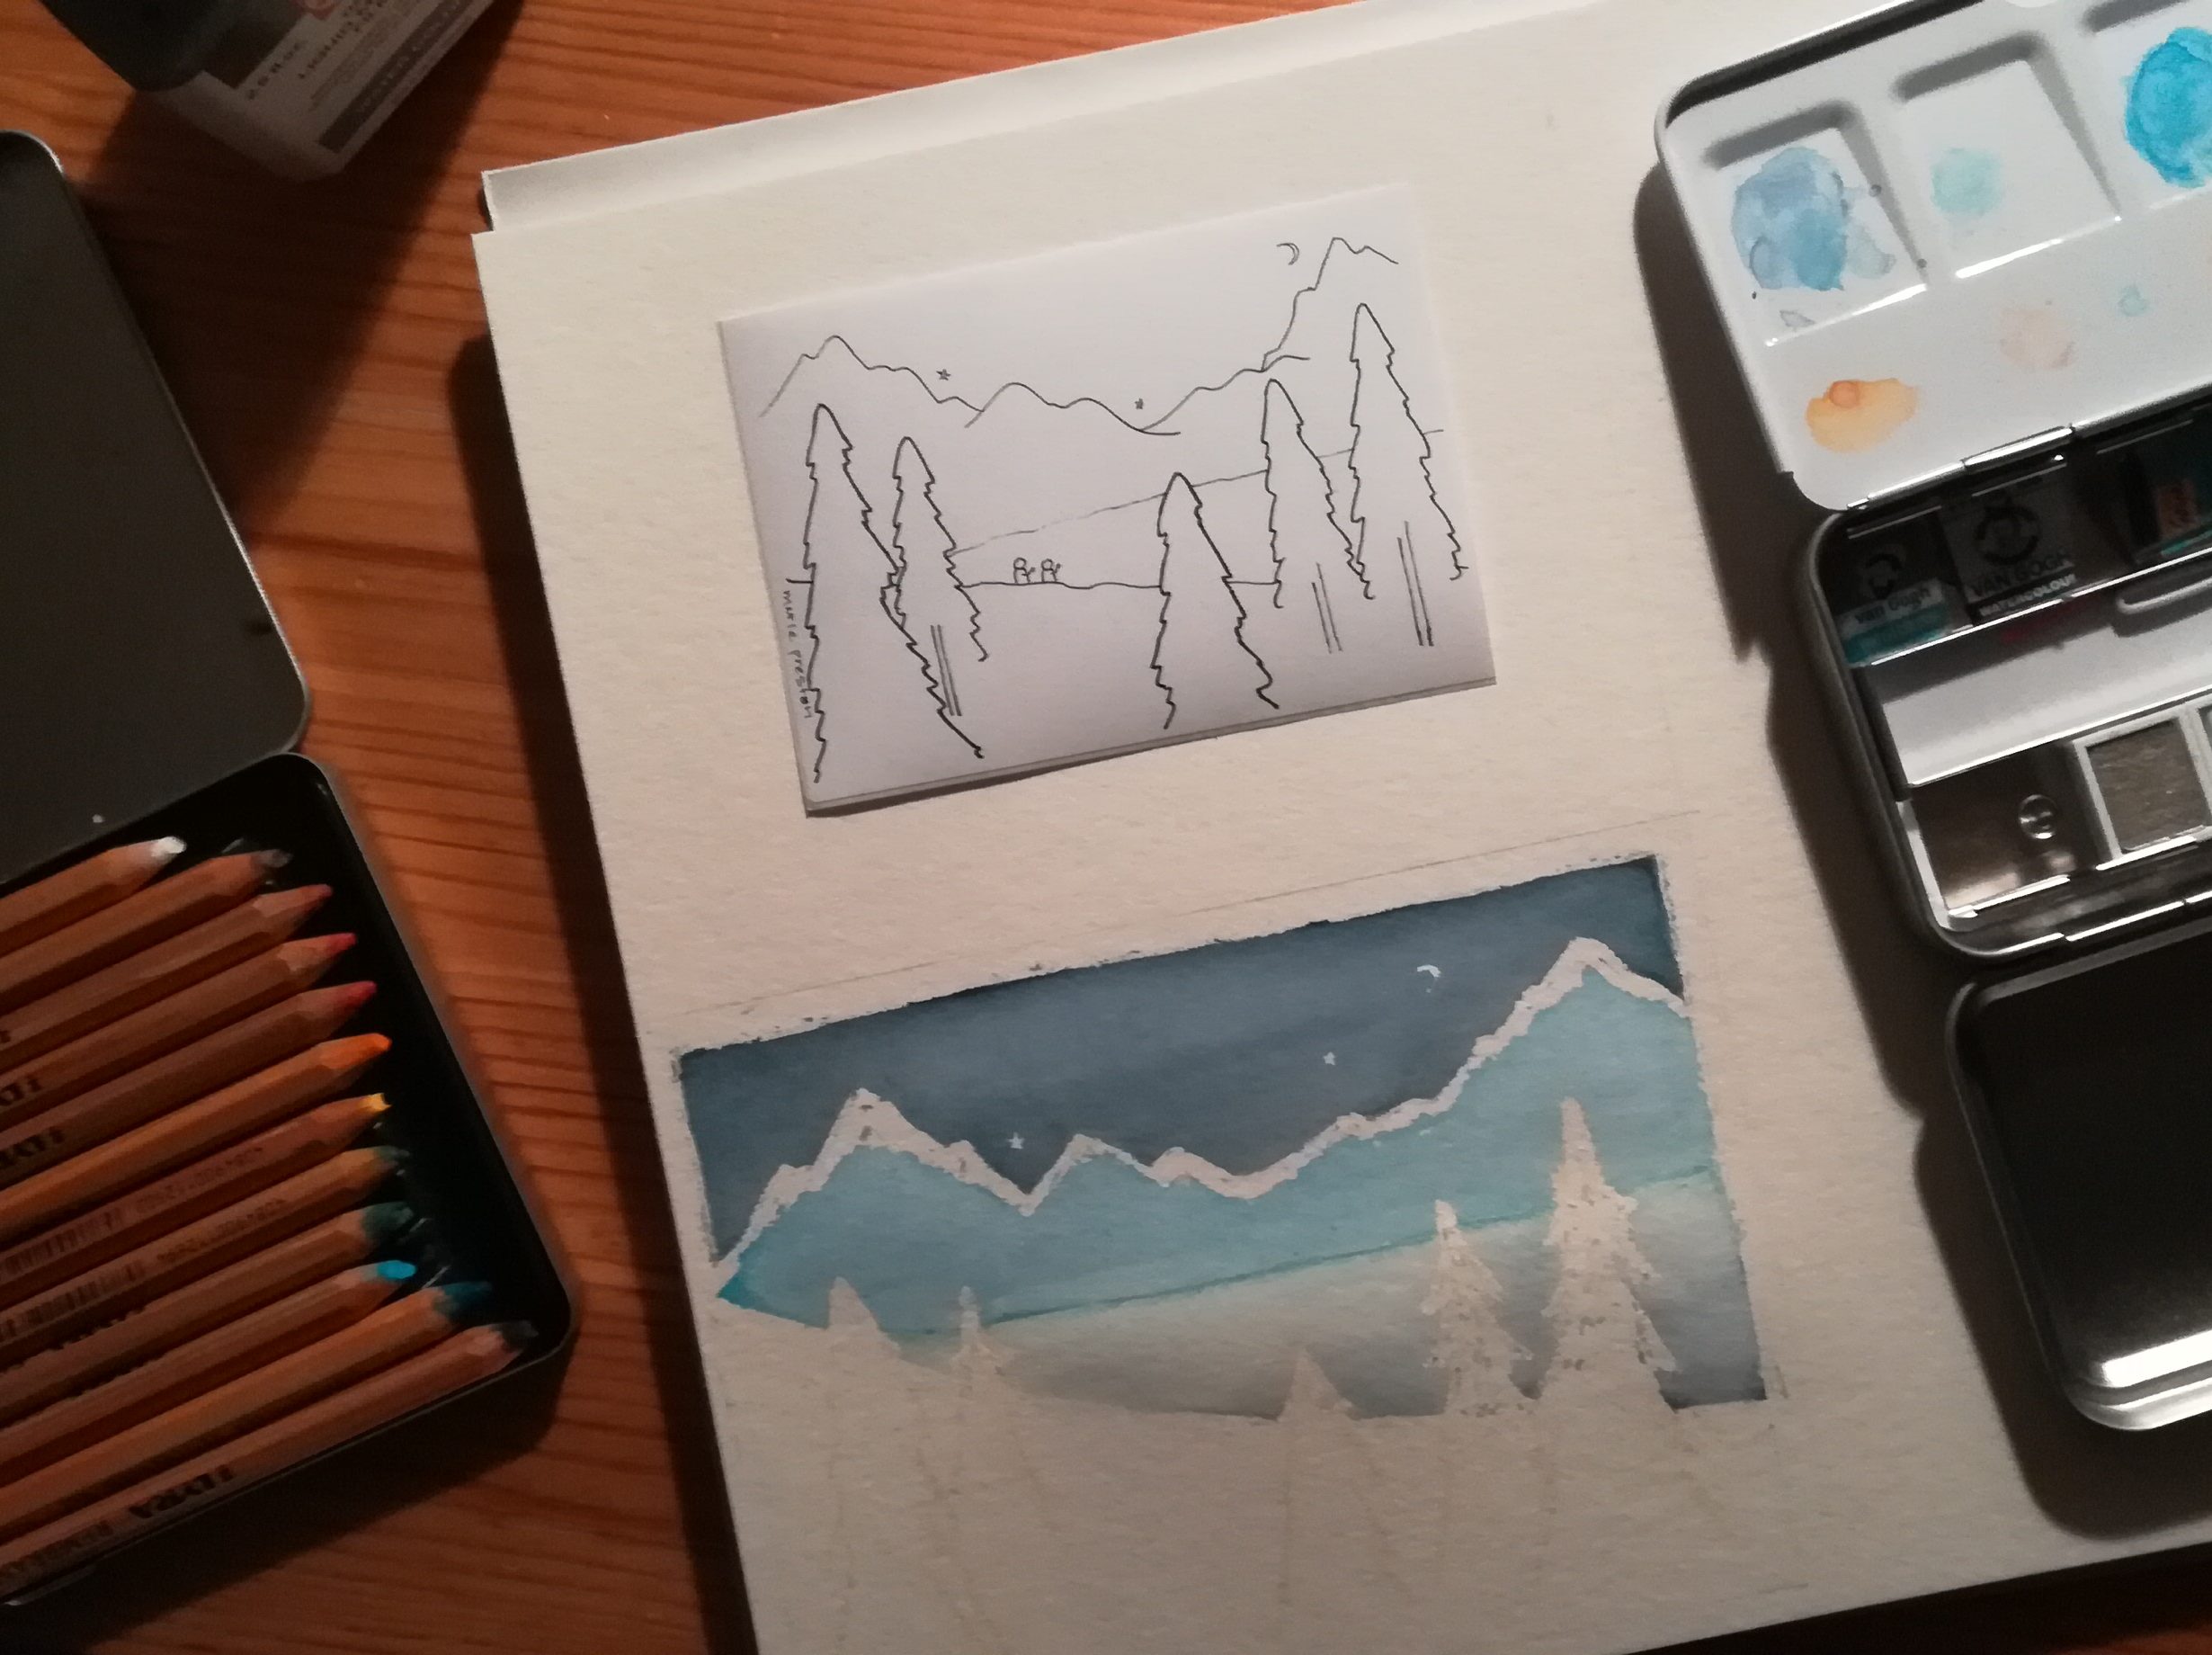 Blue on Blue: After masking. Pen illustration, watercolour sky and mountains with white trees, pencils, paint